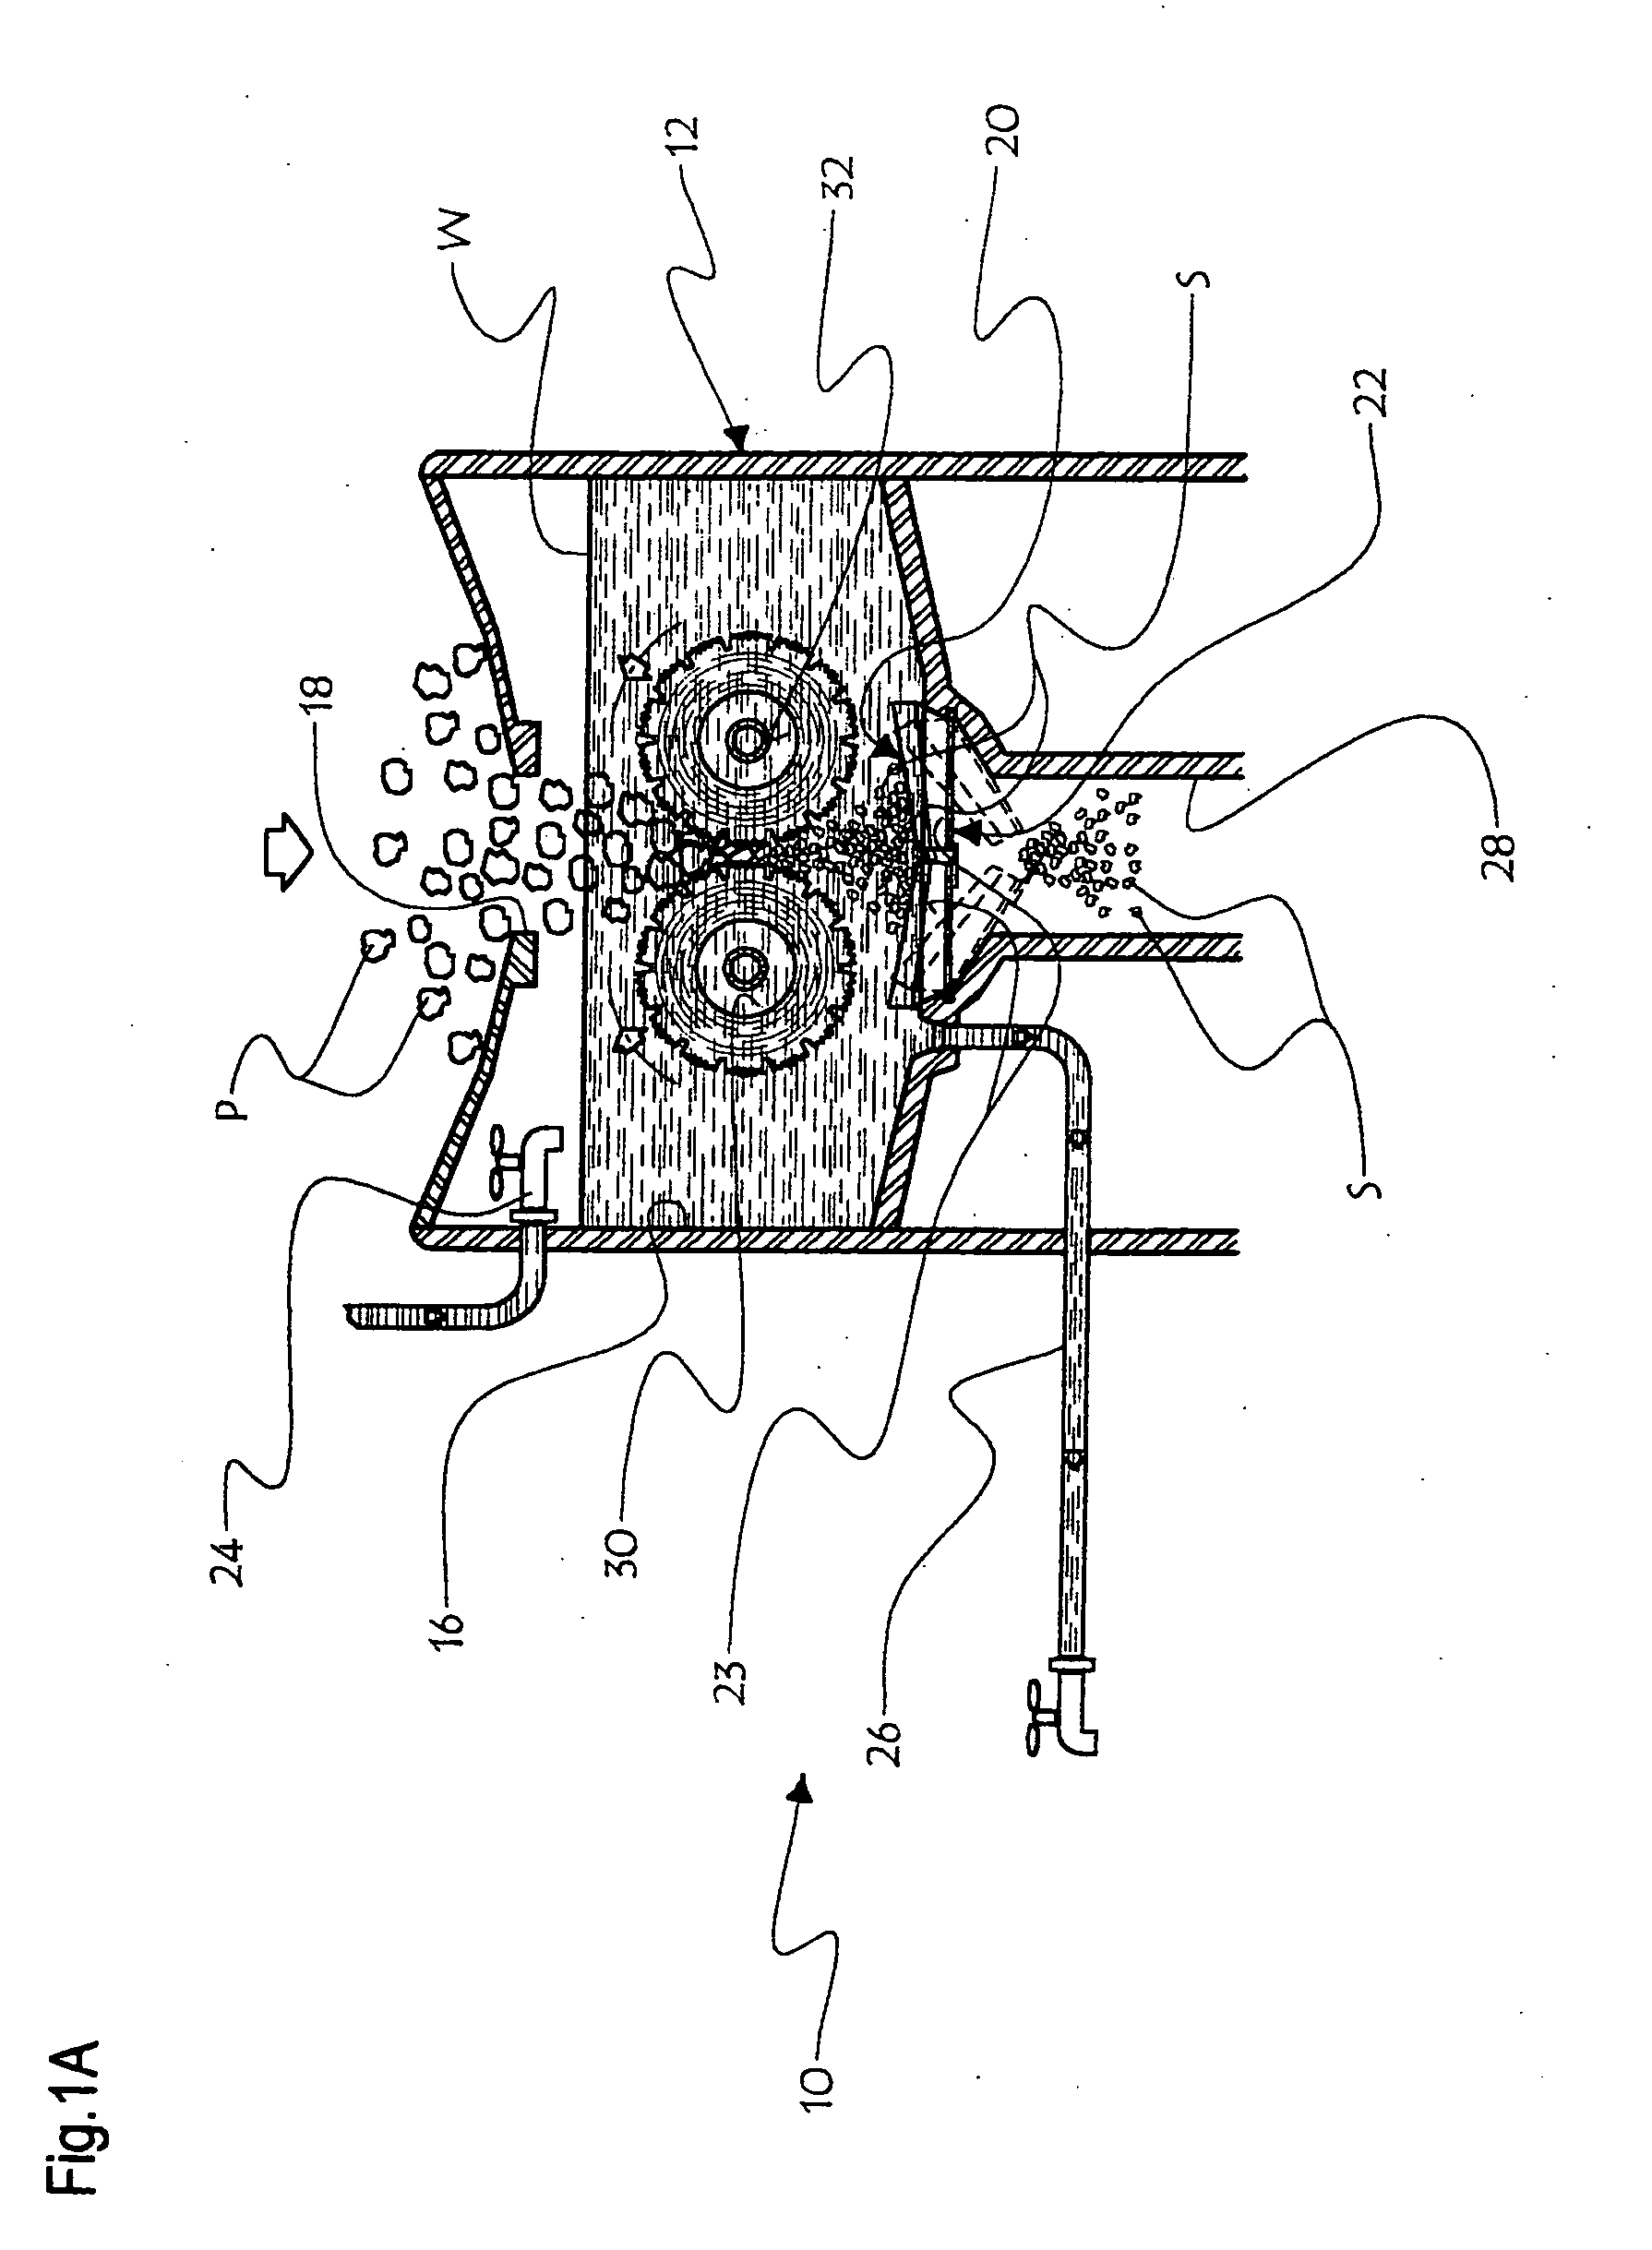 Method for preventing asbestos from freeing airborne particles